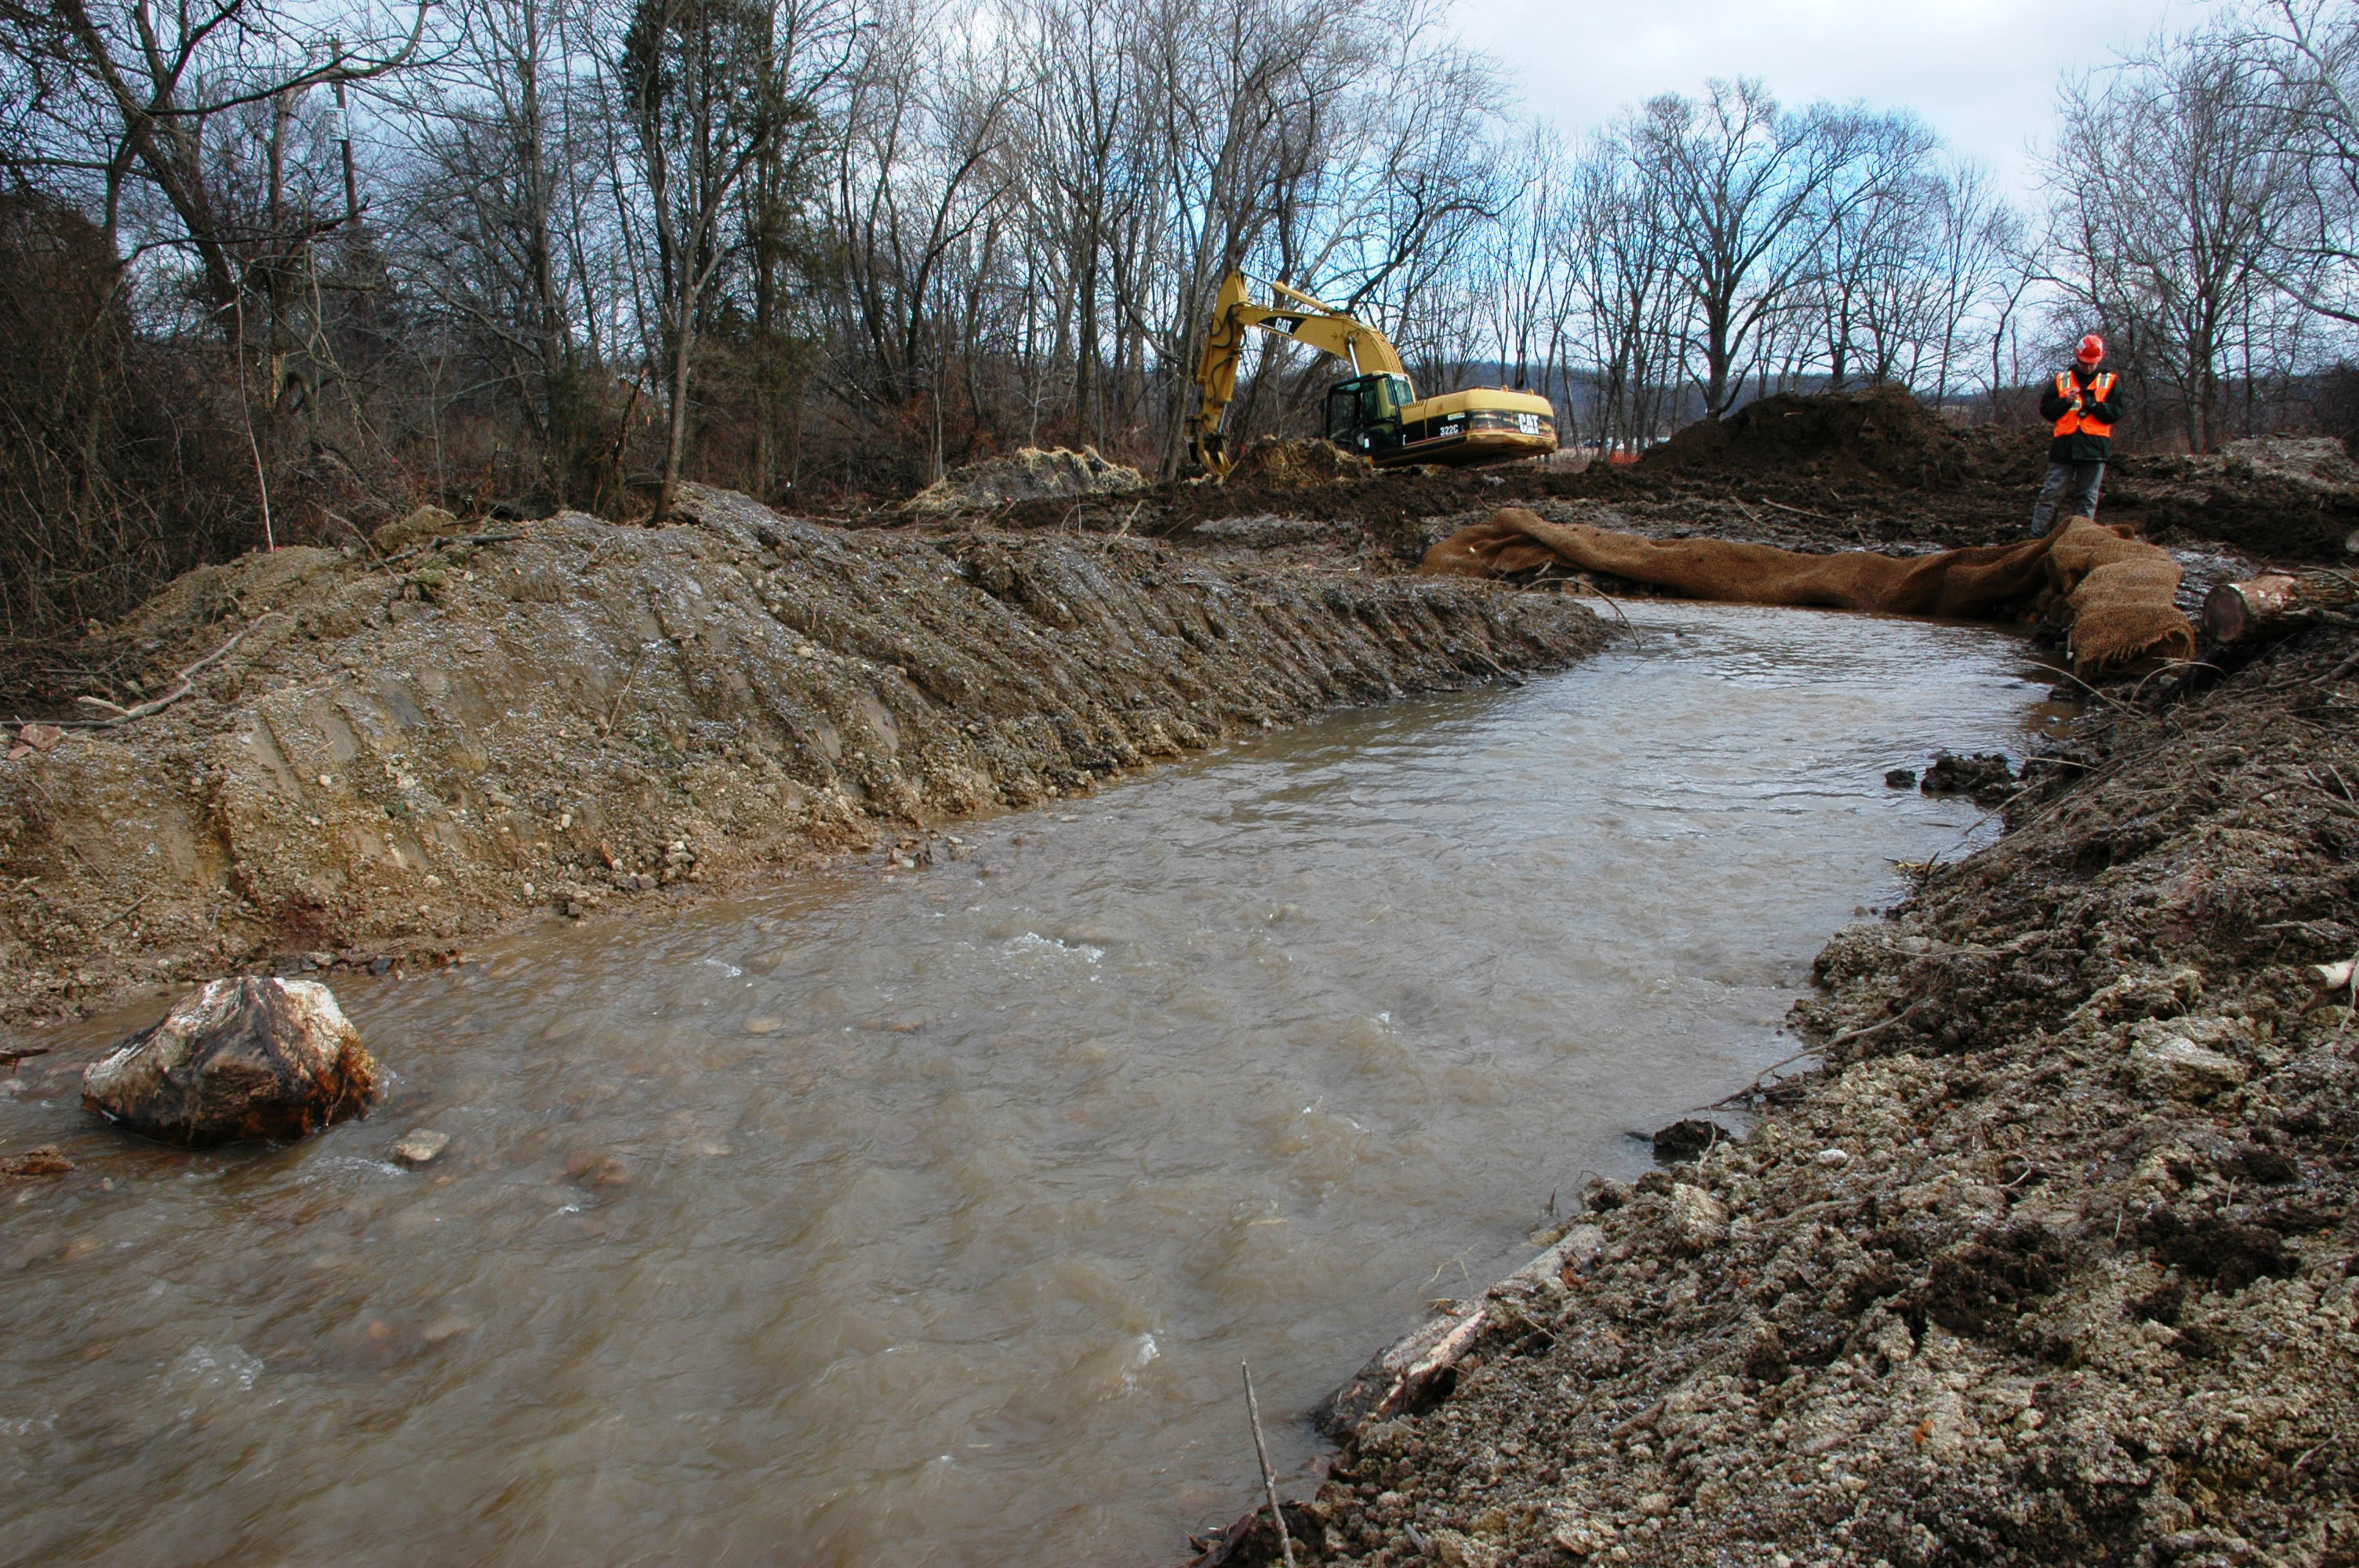 A stream curves between tall, bare earth banks. Matting is laid over the banks to prevent erosion. A man wearing a hardhat stands on one bank. A yellow backhoe sits on the bank behind him.